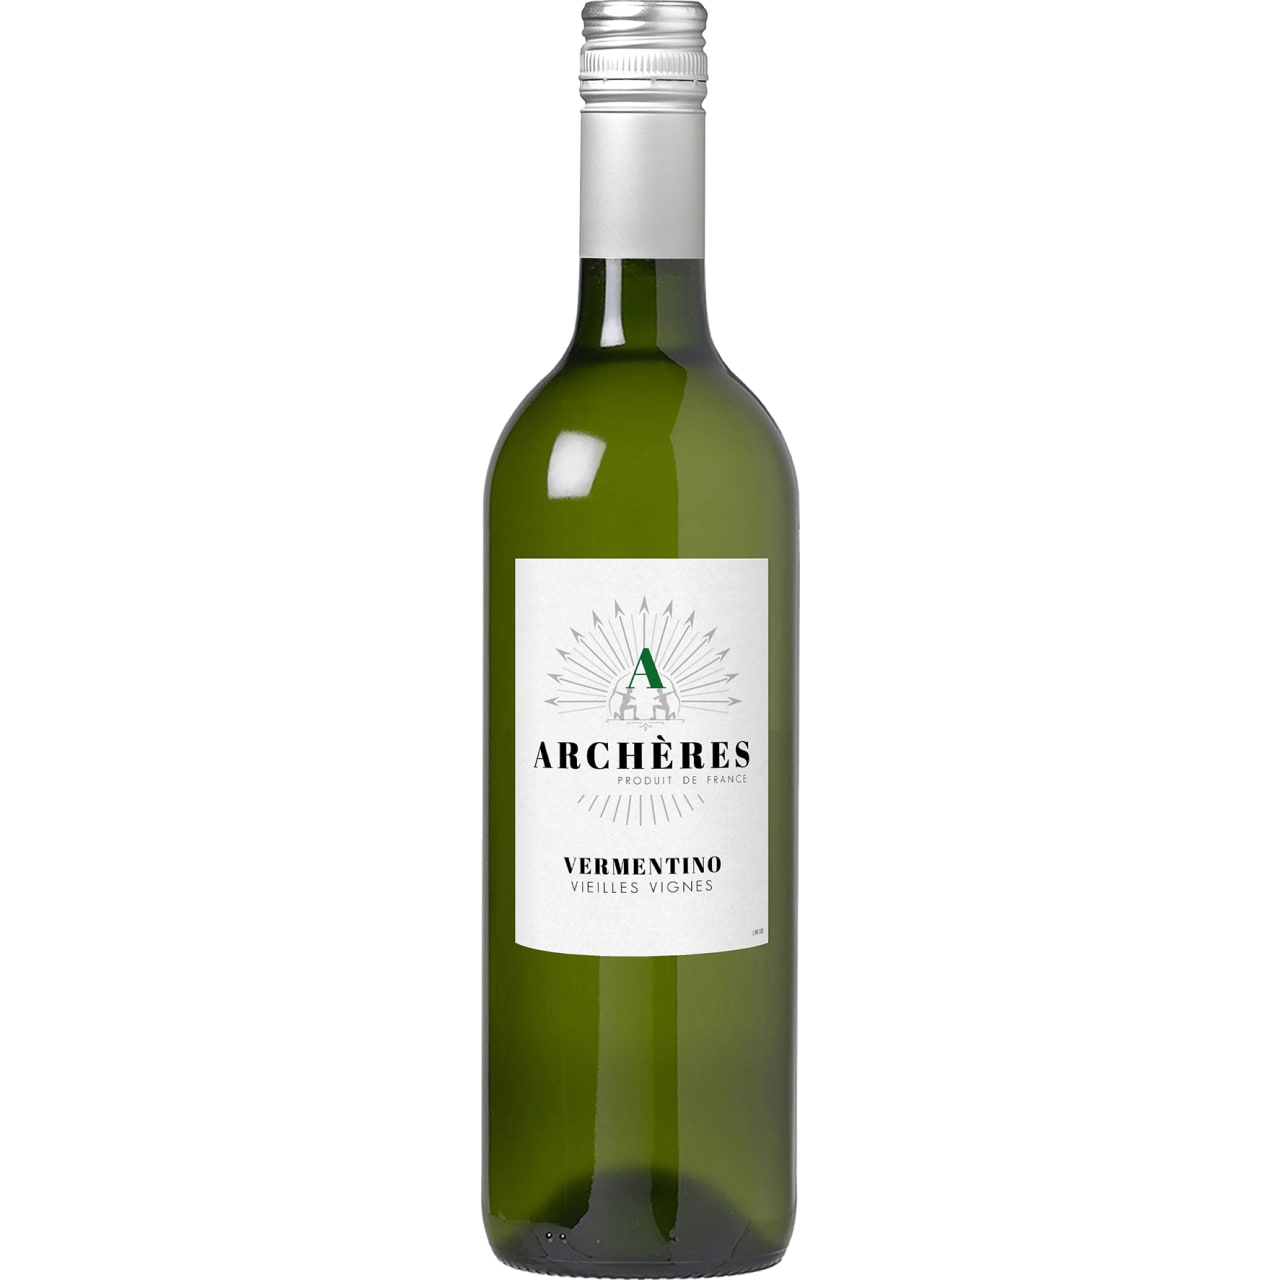 Bright yellow with green hues. Floral, peachy and white blossom aromas are met with a soft, creamy and well-balanced palate.